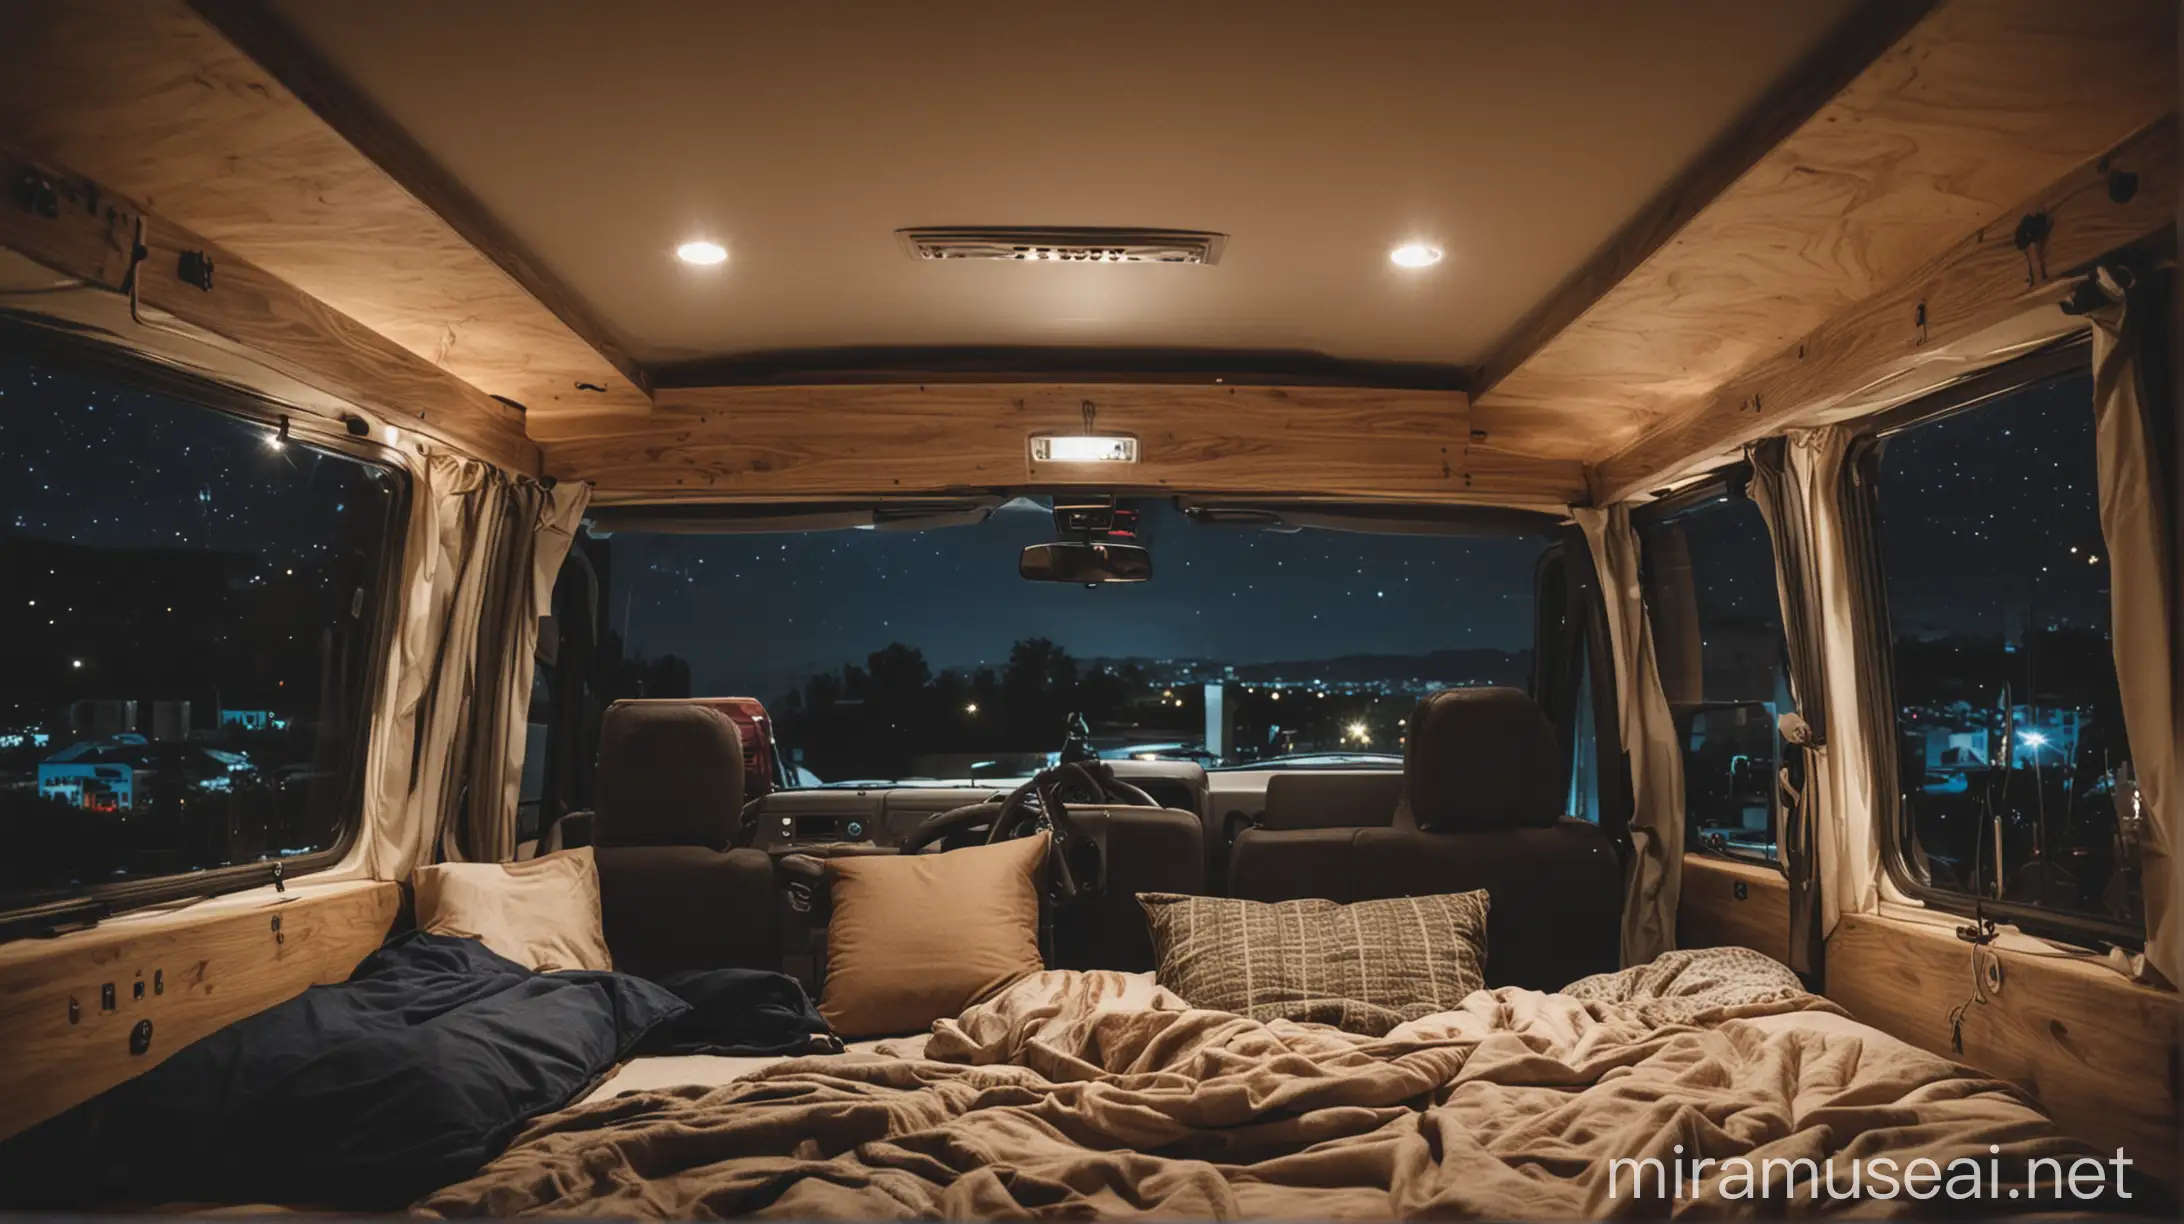 Interior mobile campervan with wide window at night time